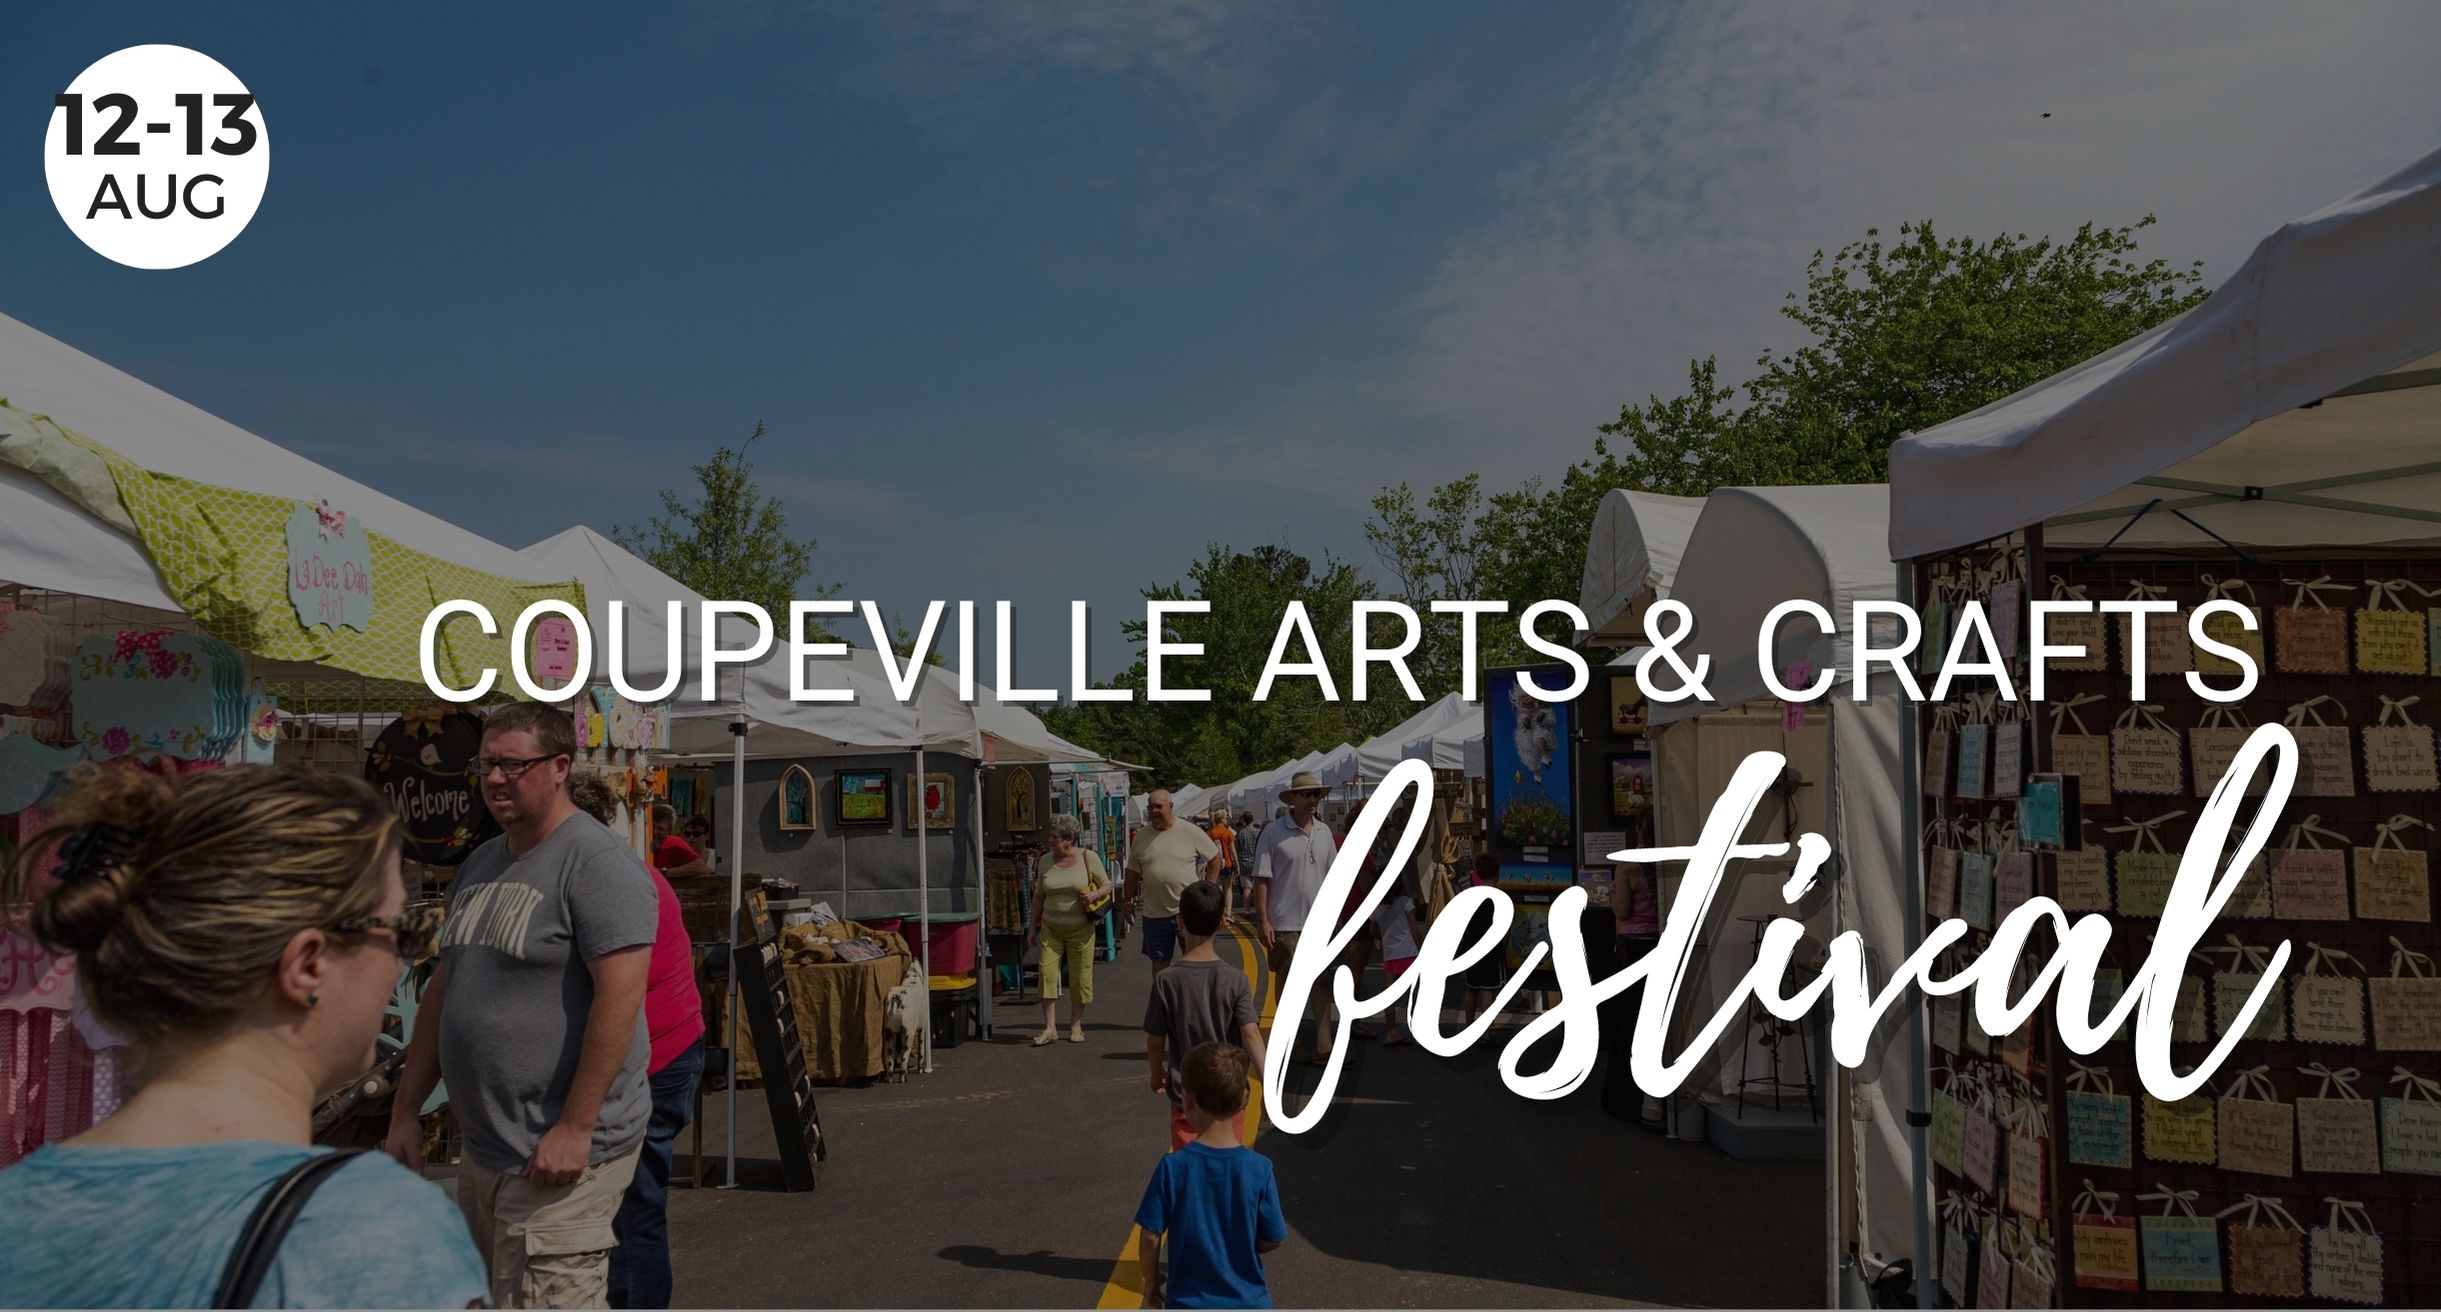 Coupeville Arts And Crafts Festval